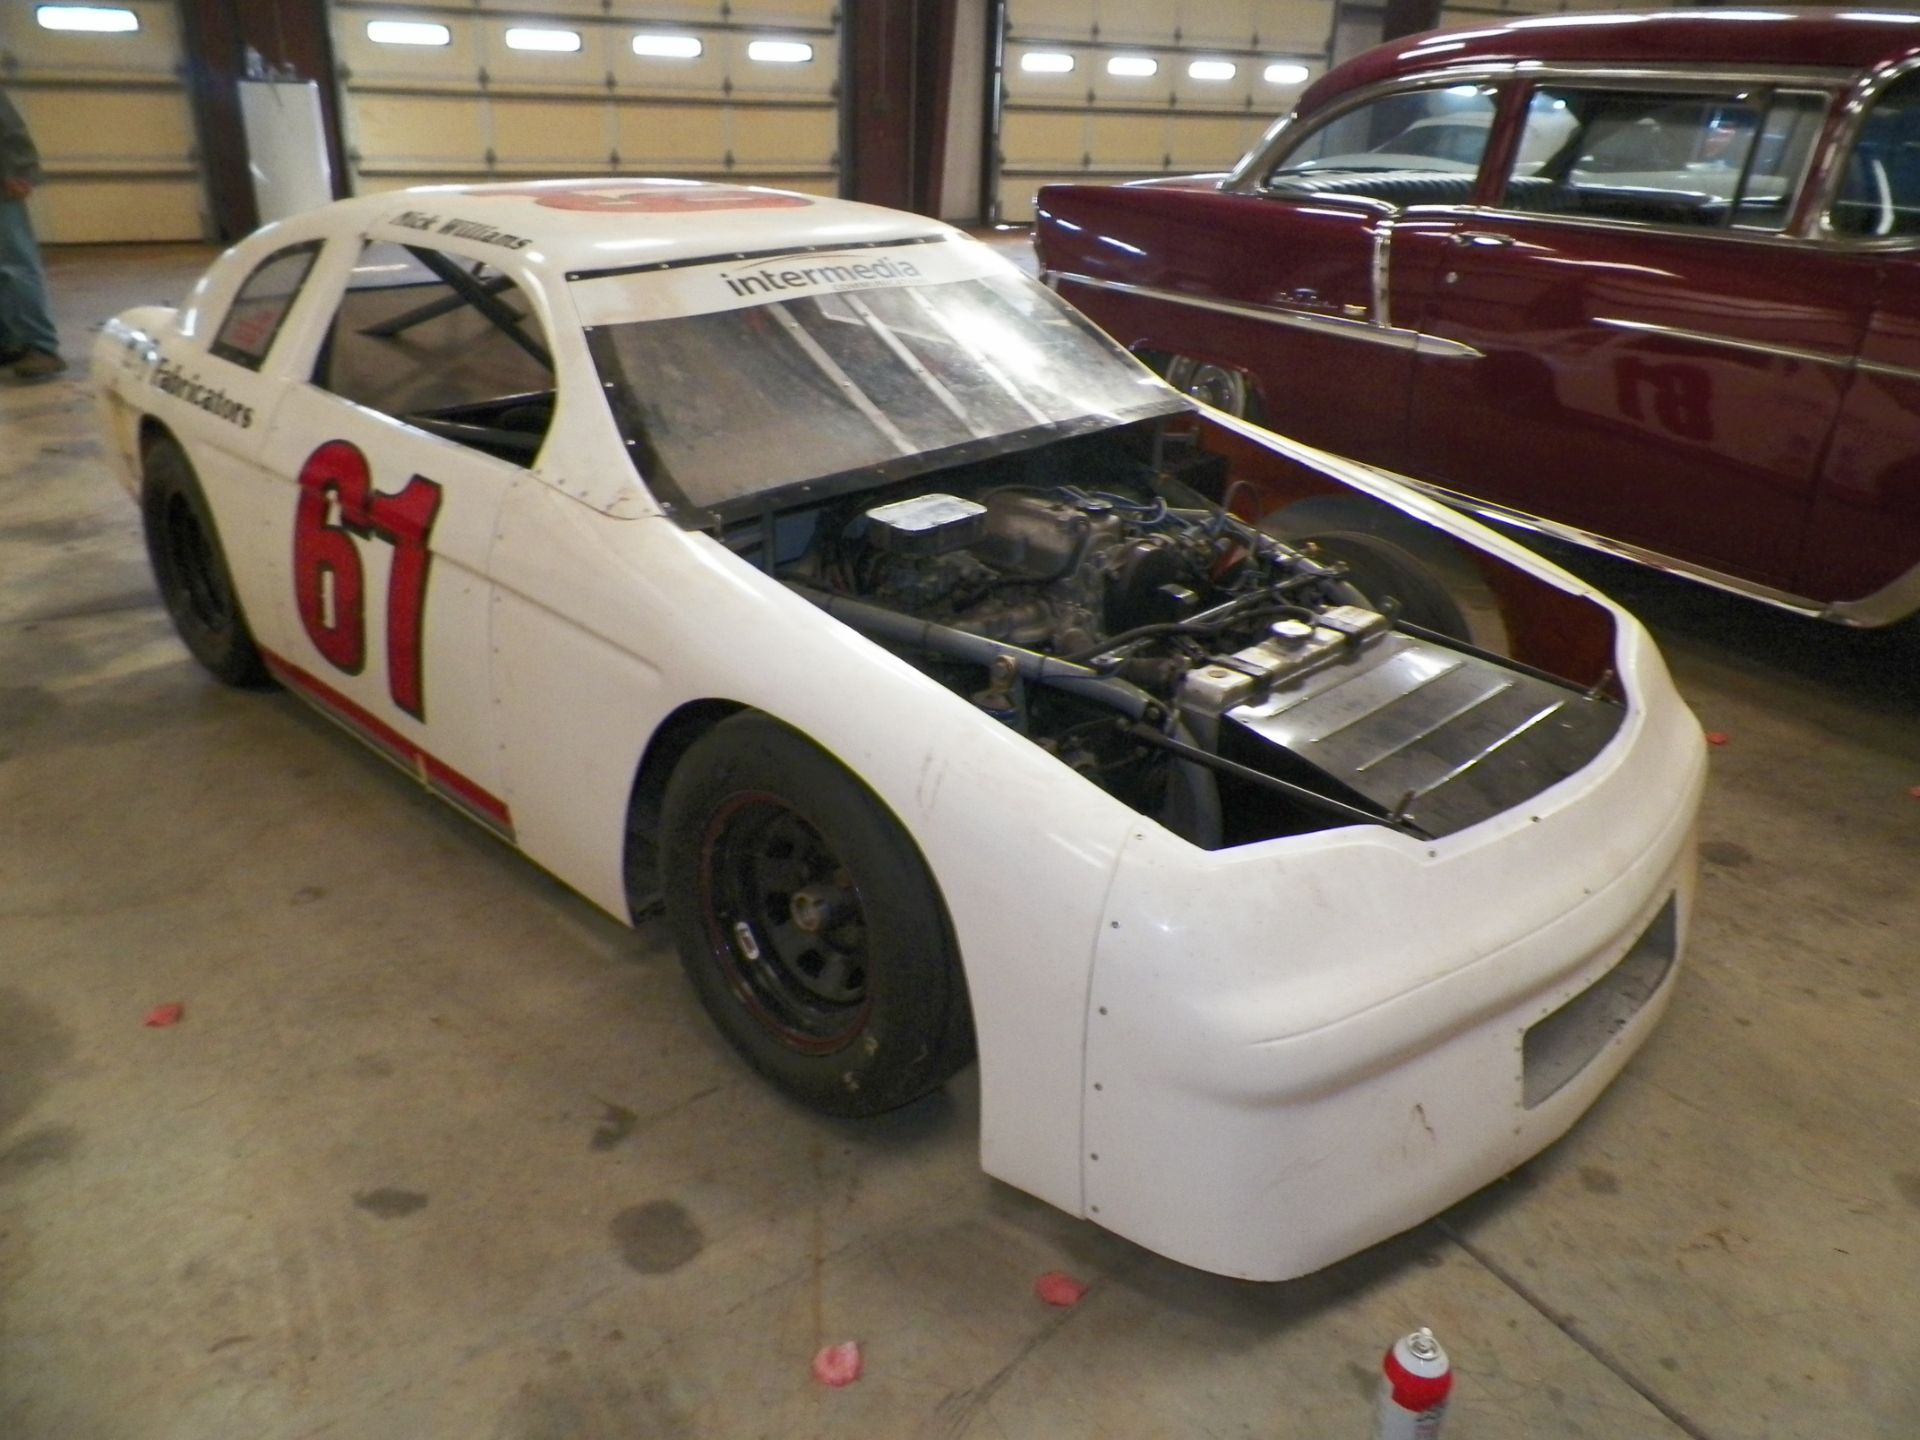 Allison Legacy Race Car Monte Carlo w/ Engines - Image 2 of 4